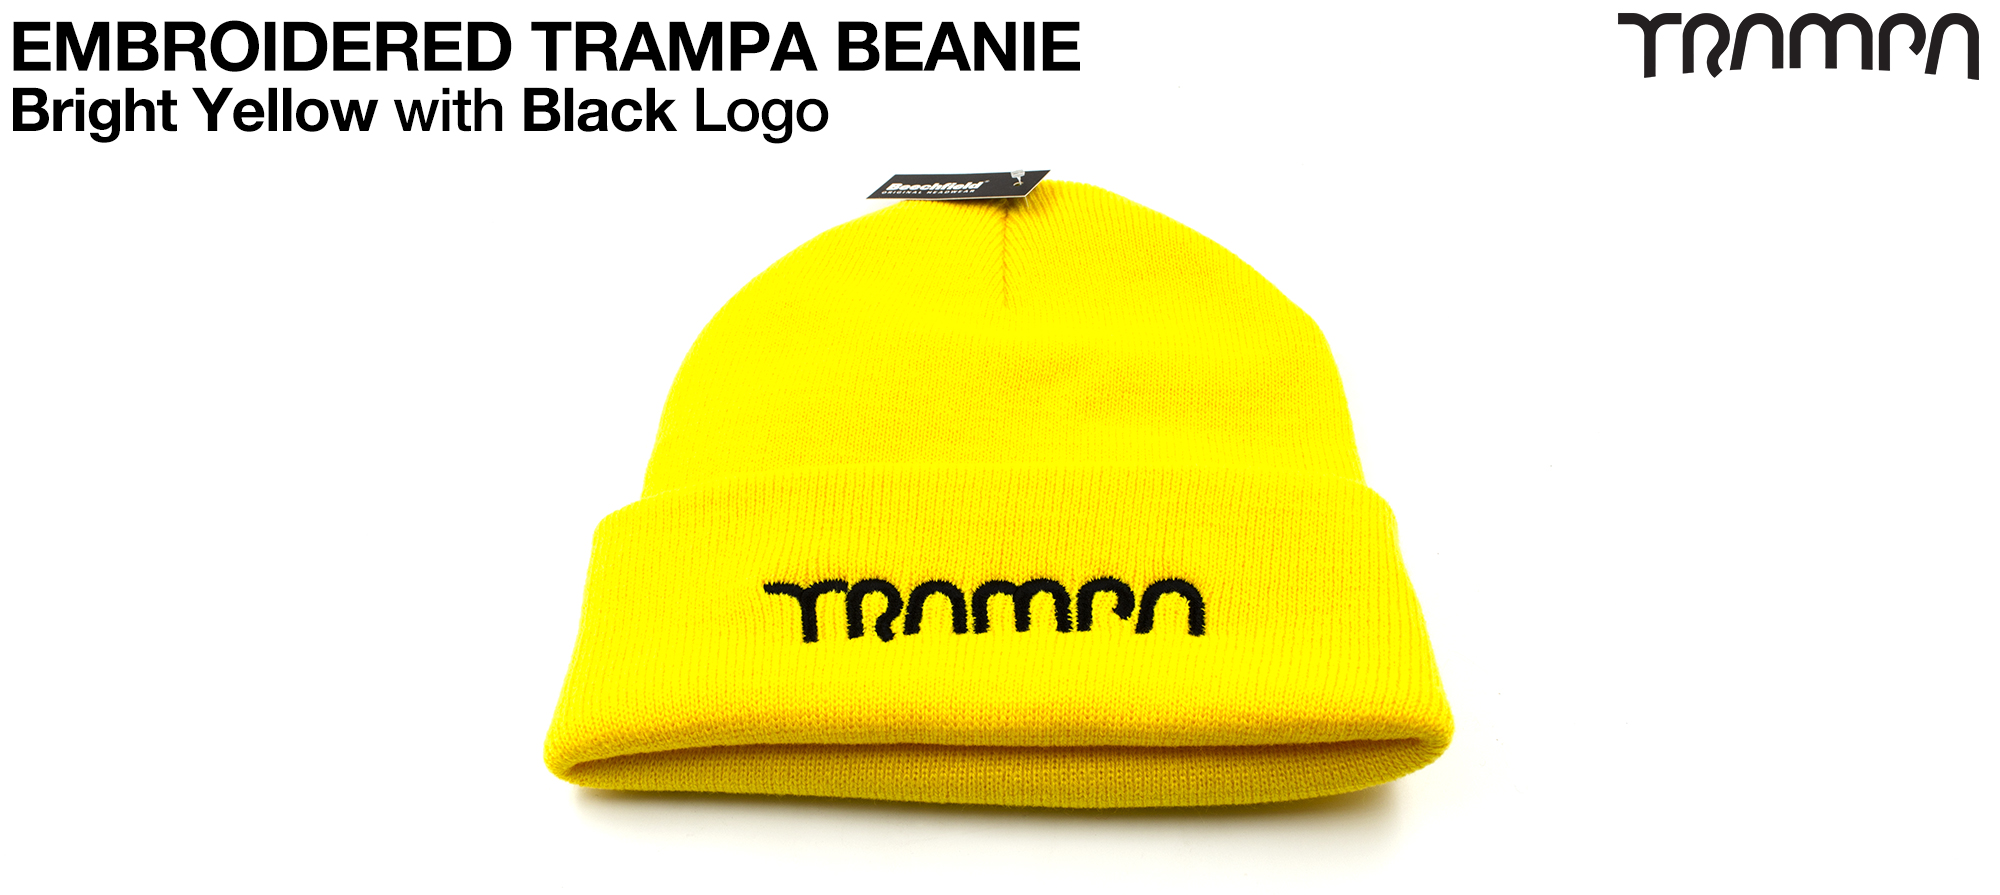 Bright YELLOW Woolly hat with BLACK Embroidered TRAMPA logo - Double thick turn over for extra warmth